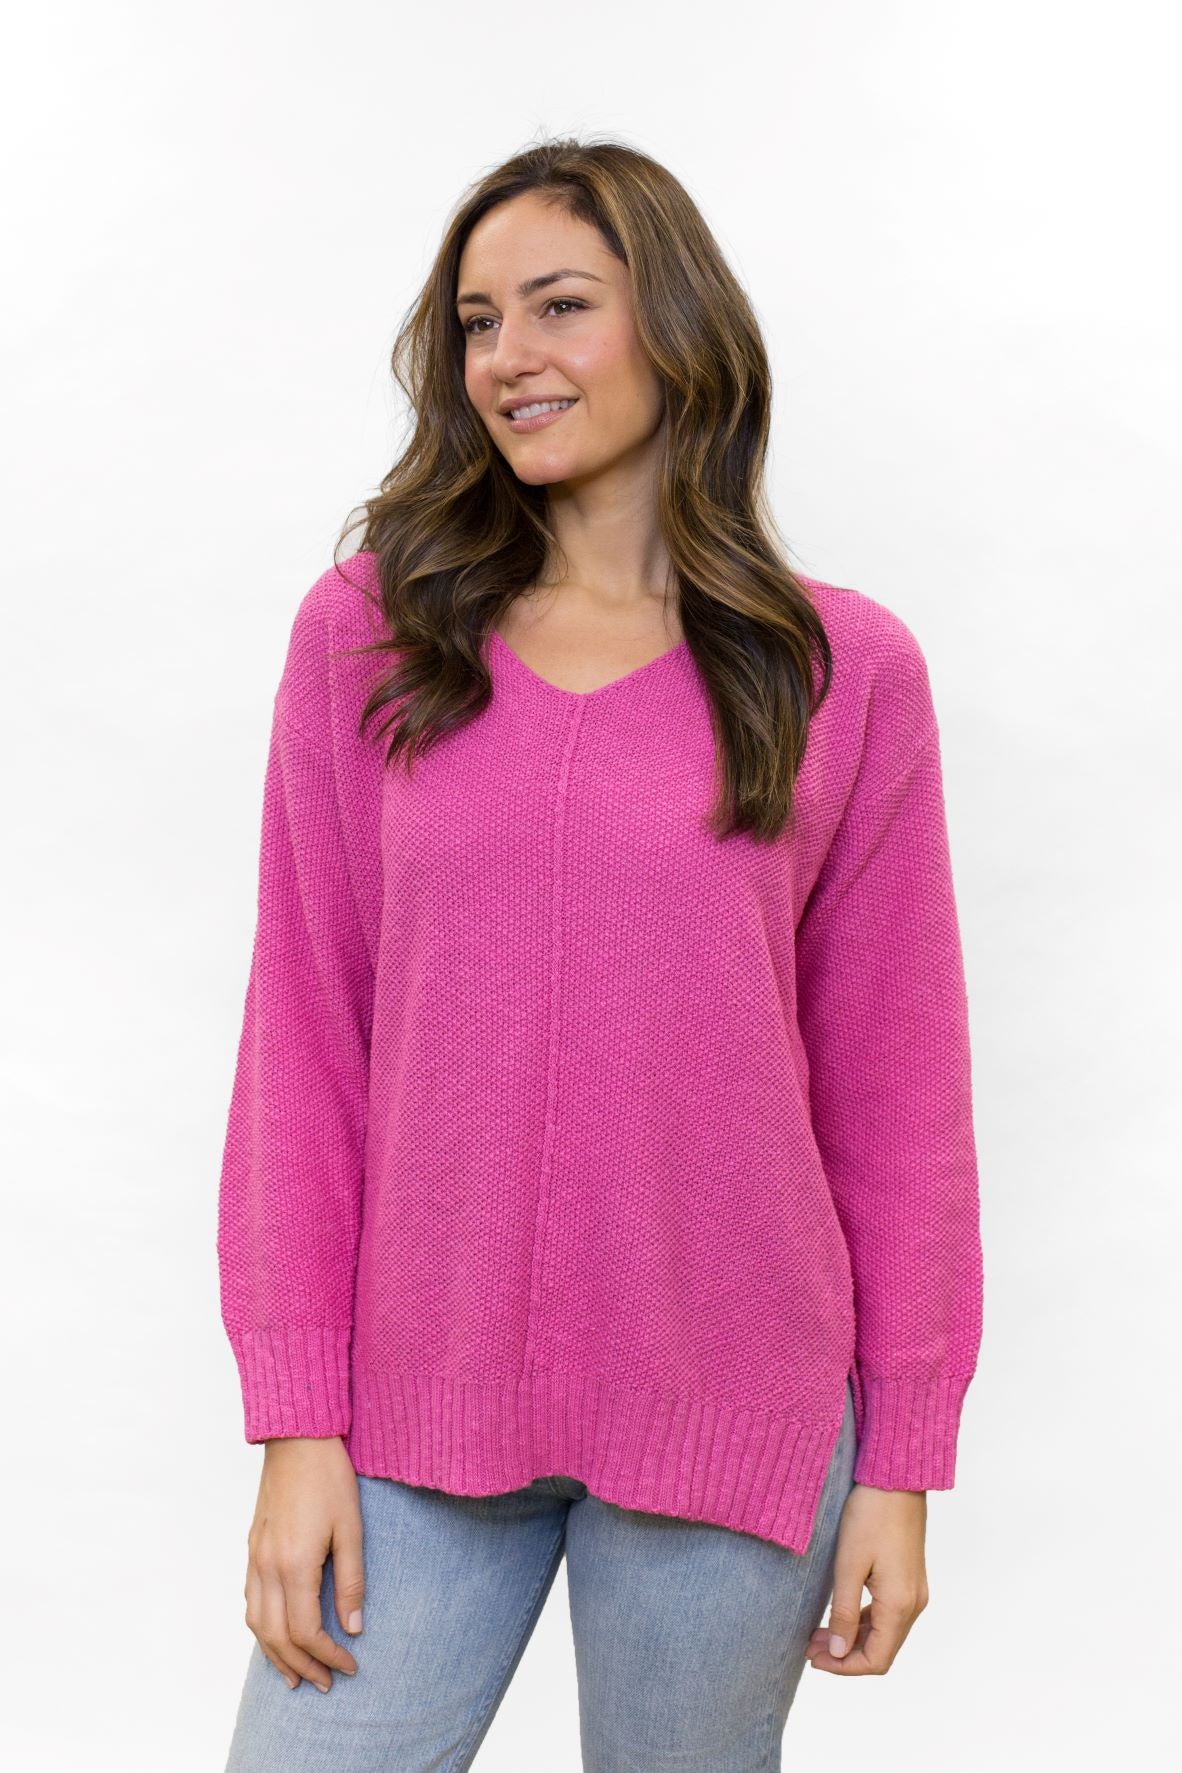 Fuchsia 100% cotton slub seed stitch sweater by Avalin. Features long sleeves, v-neck, center seam, ribbed cuffs and ribbed straight hem with side slits. Falls just below mid hip.